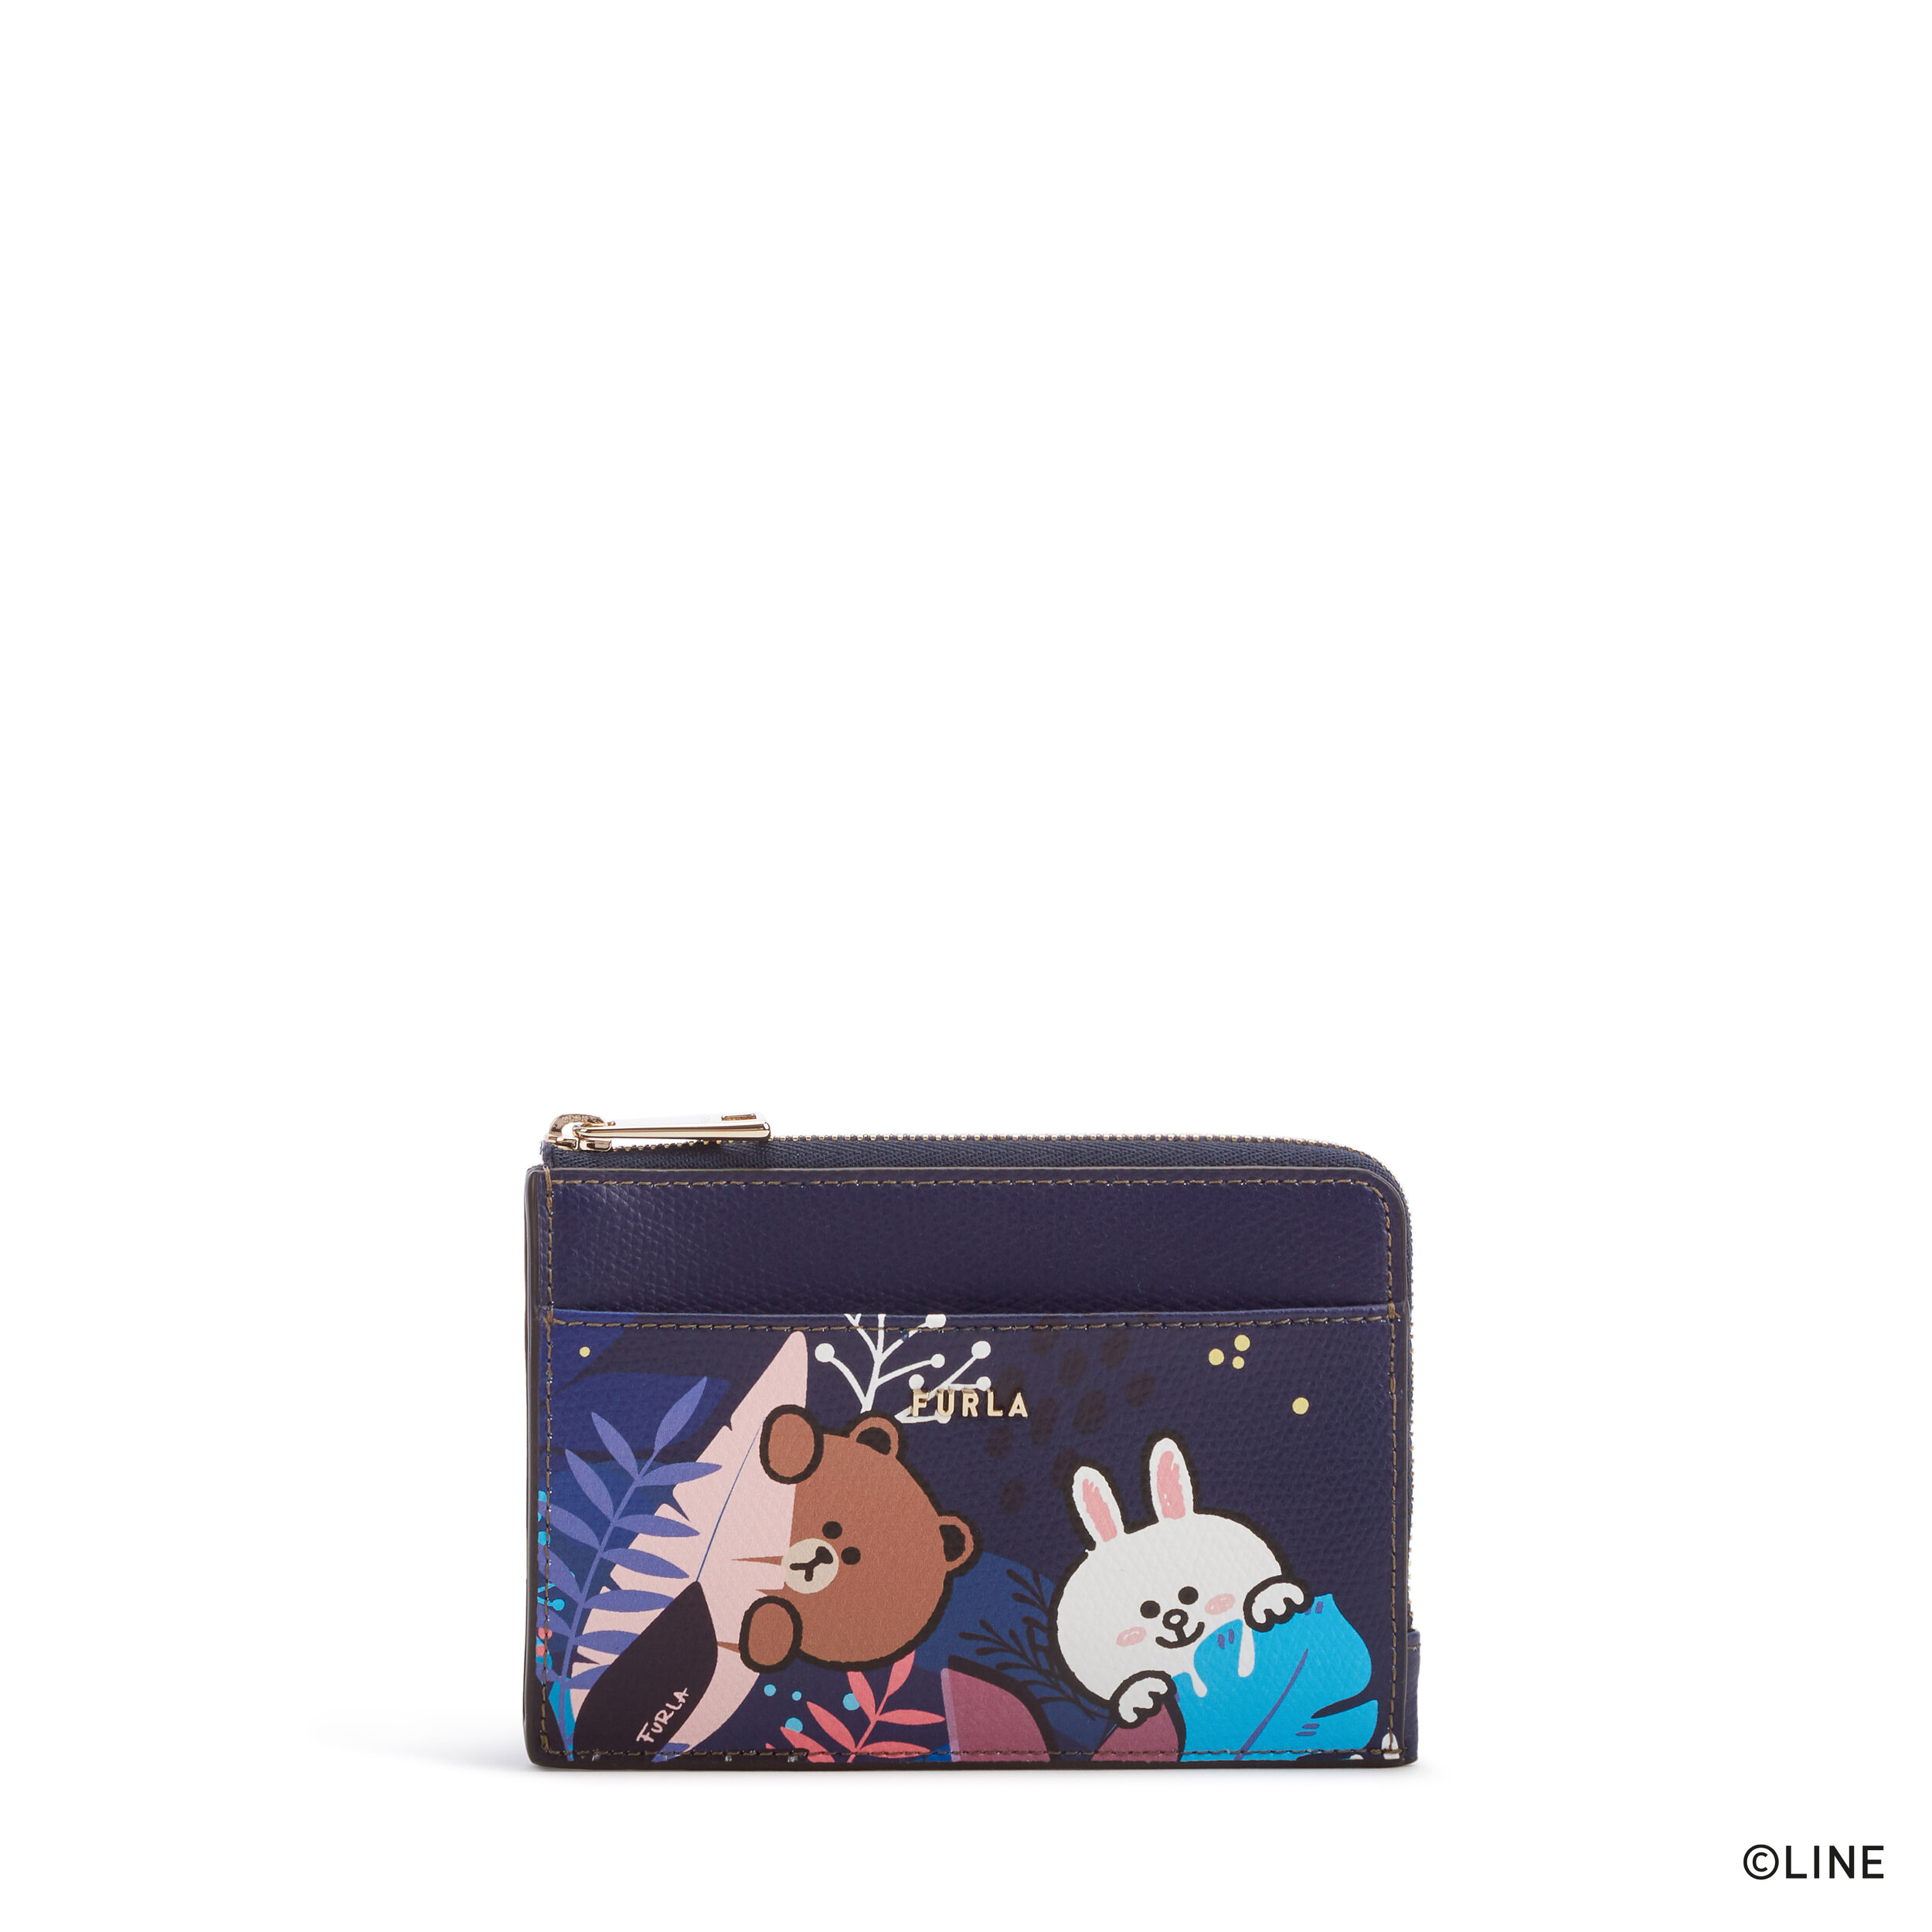 FURLA LINE FRIENDS M CARD CASE_NIGHT PRINT ON ARES TEXTURED LEATHER_LF-copyright.jpg